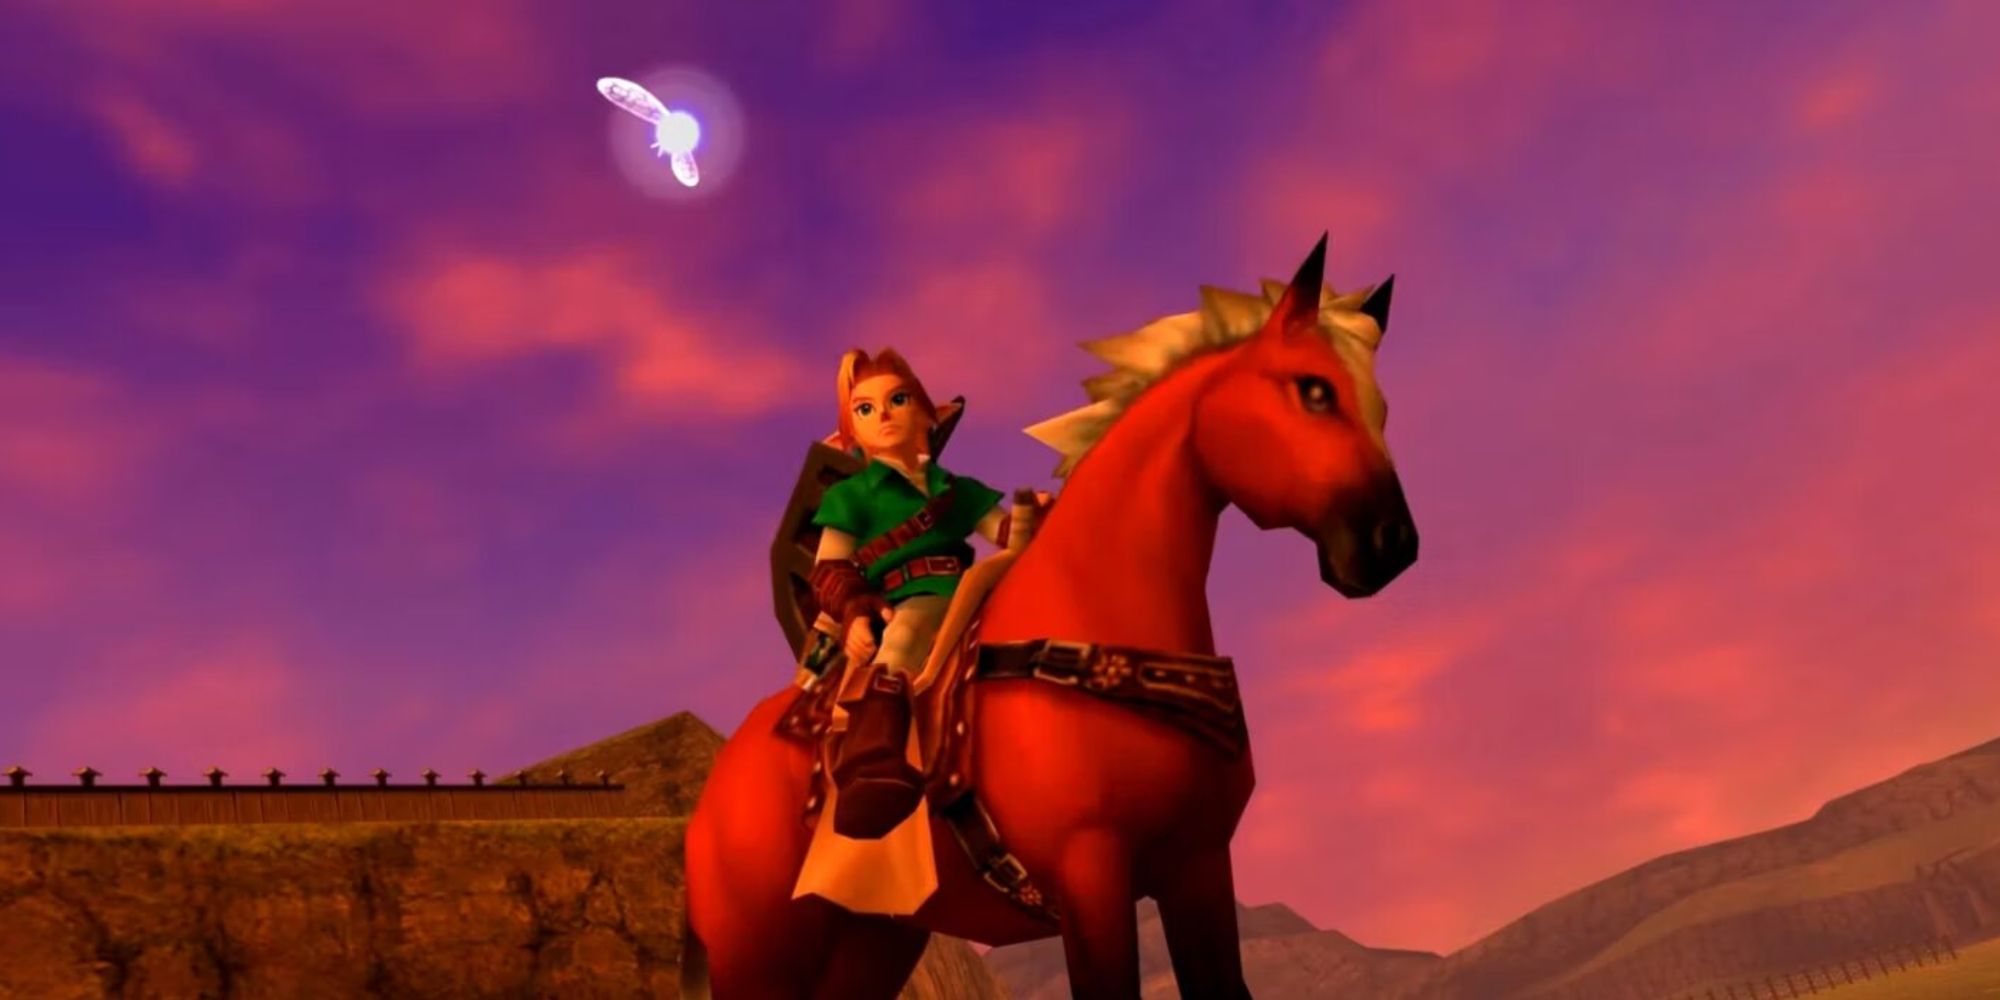 Works with the navigation on Epona's back from The Legend of Zelda: Ocarina of Time